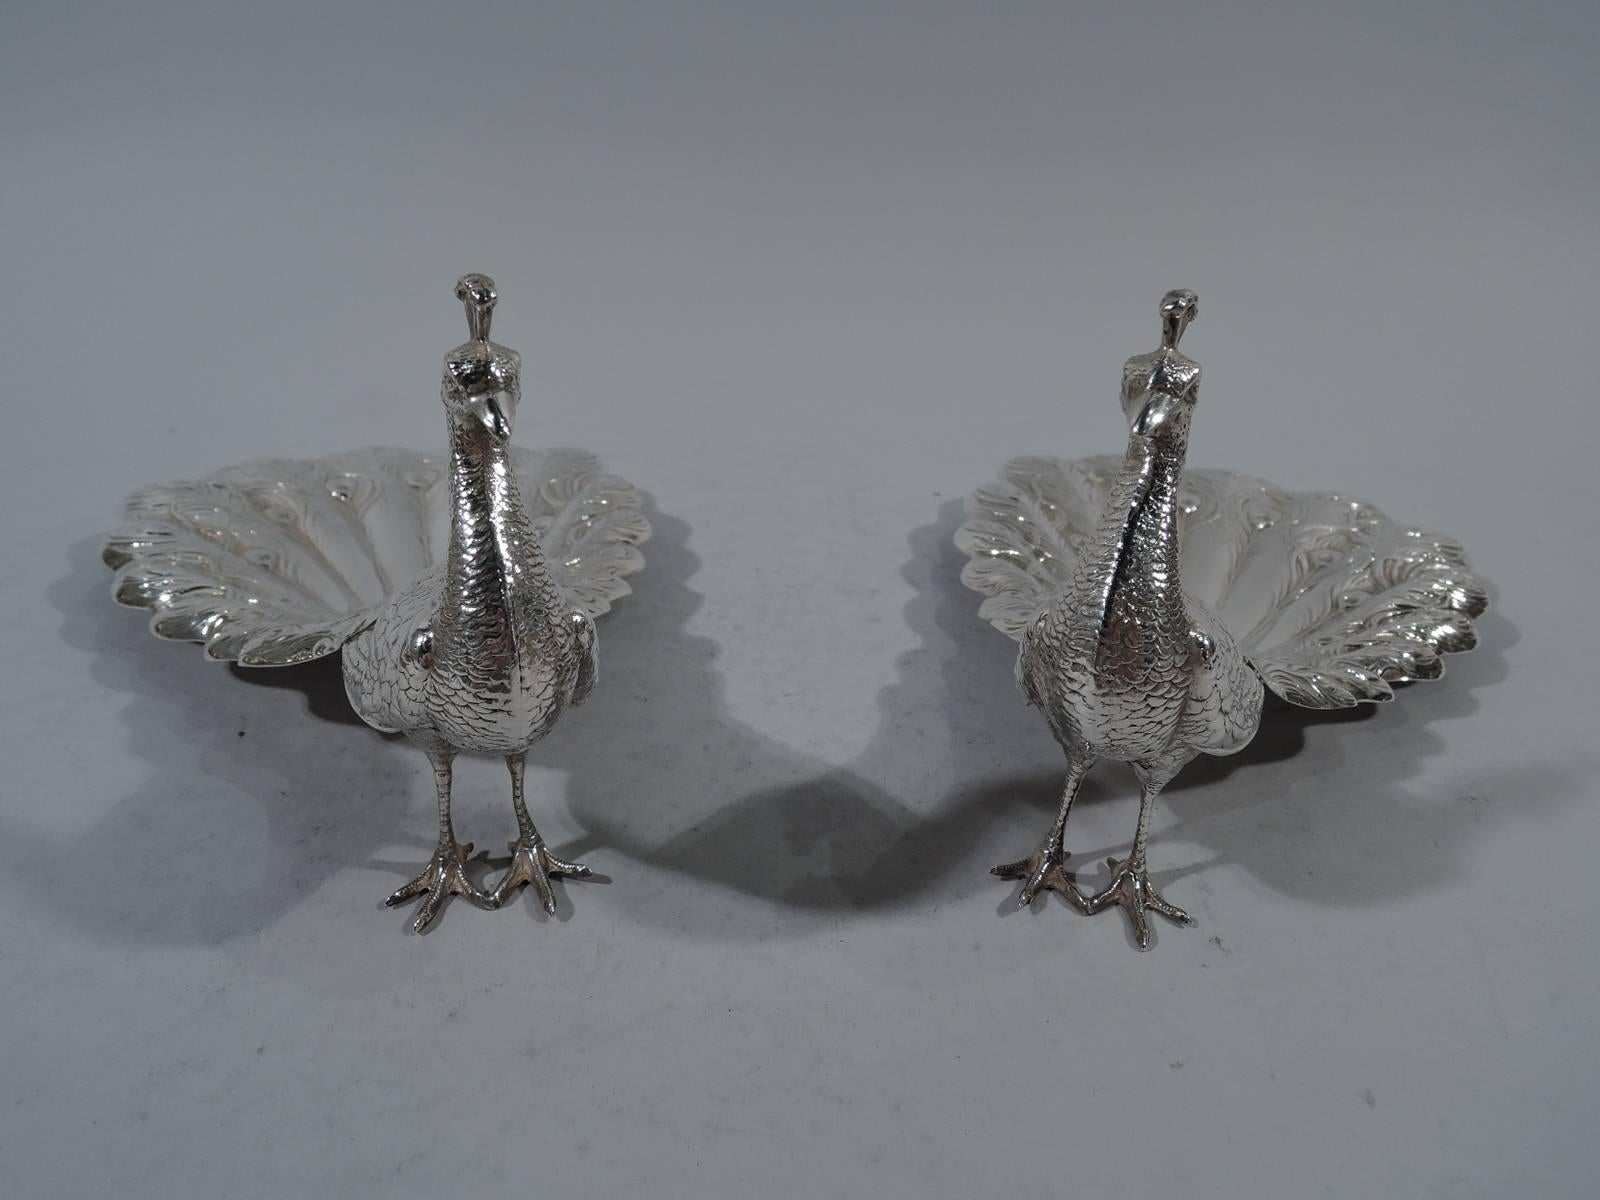 Pair of sterling silver peacocks. Made by Durgin (part of Gorham) in Providence, circa 1920. Each: Upright body, erect head, and downed tail. Realistic feathers, talons, crown, and beak. Tail hollowed - perfect for holding treats. Hallmark includes